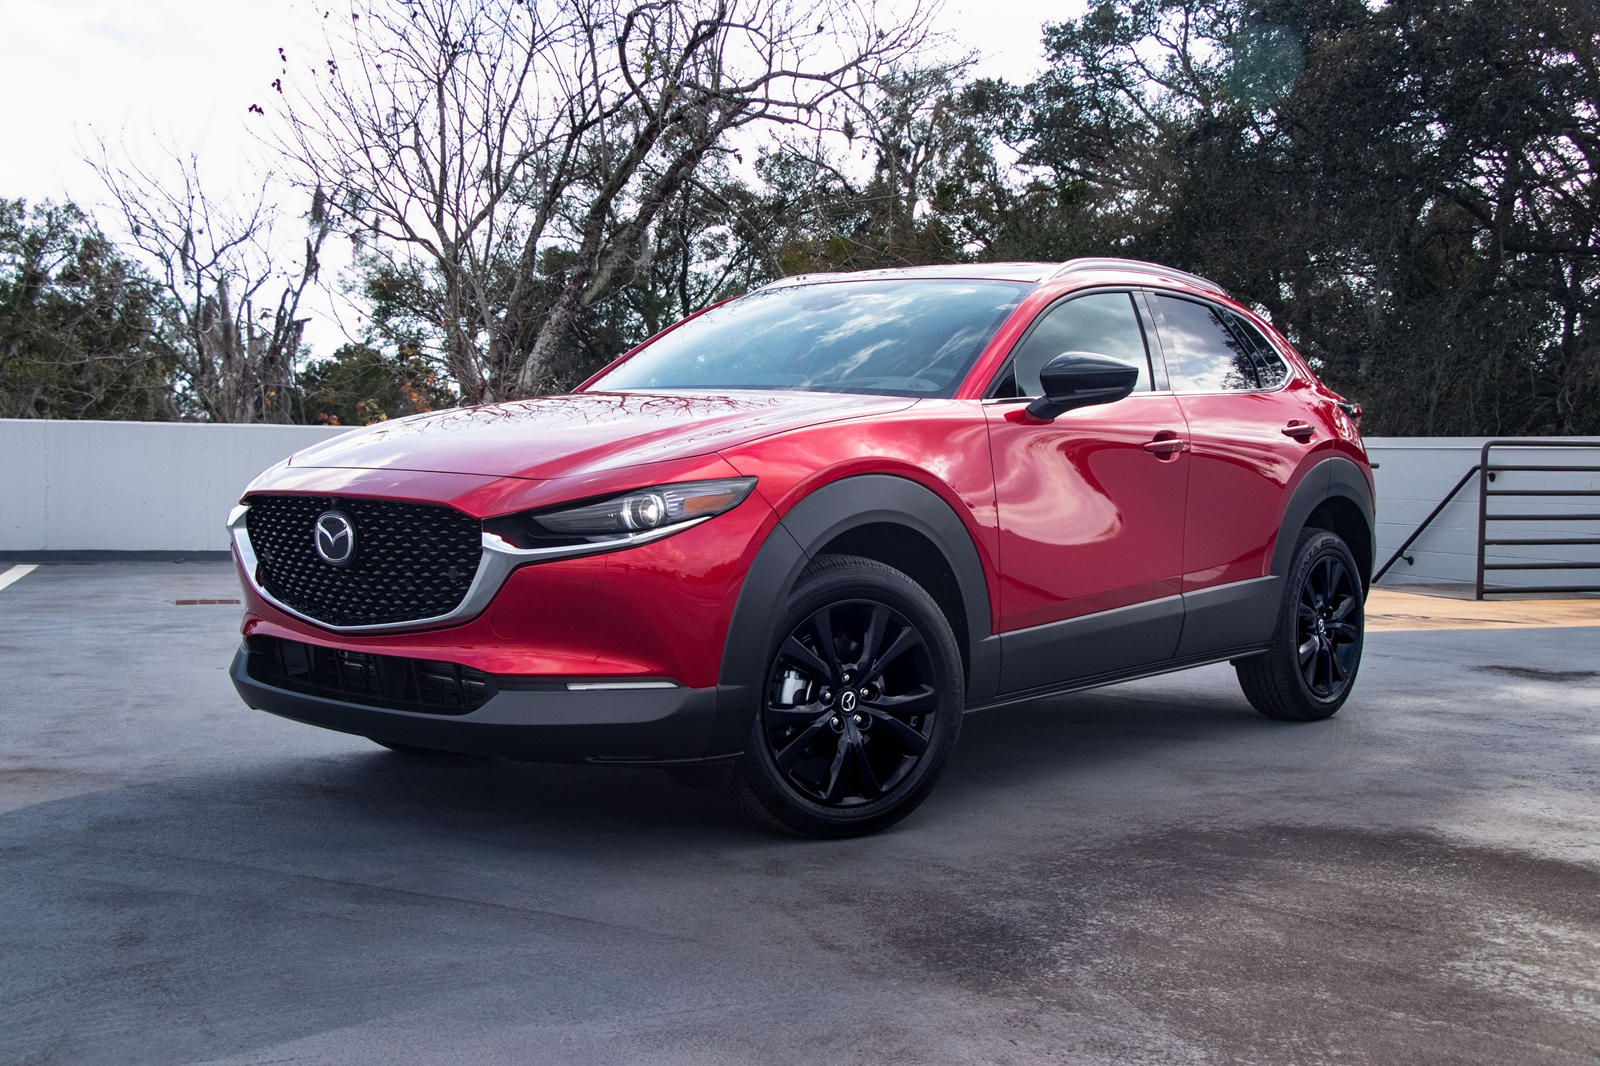 Mazda CX-30 review: A crossover with ideal balance